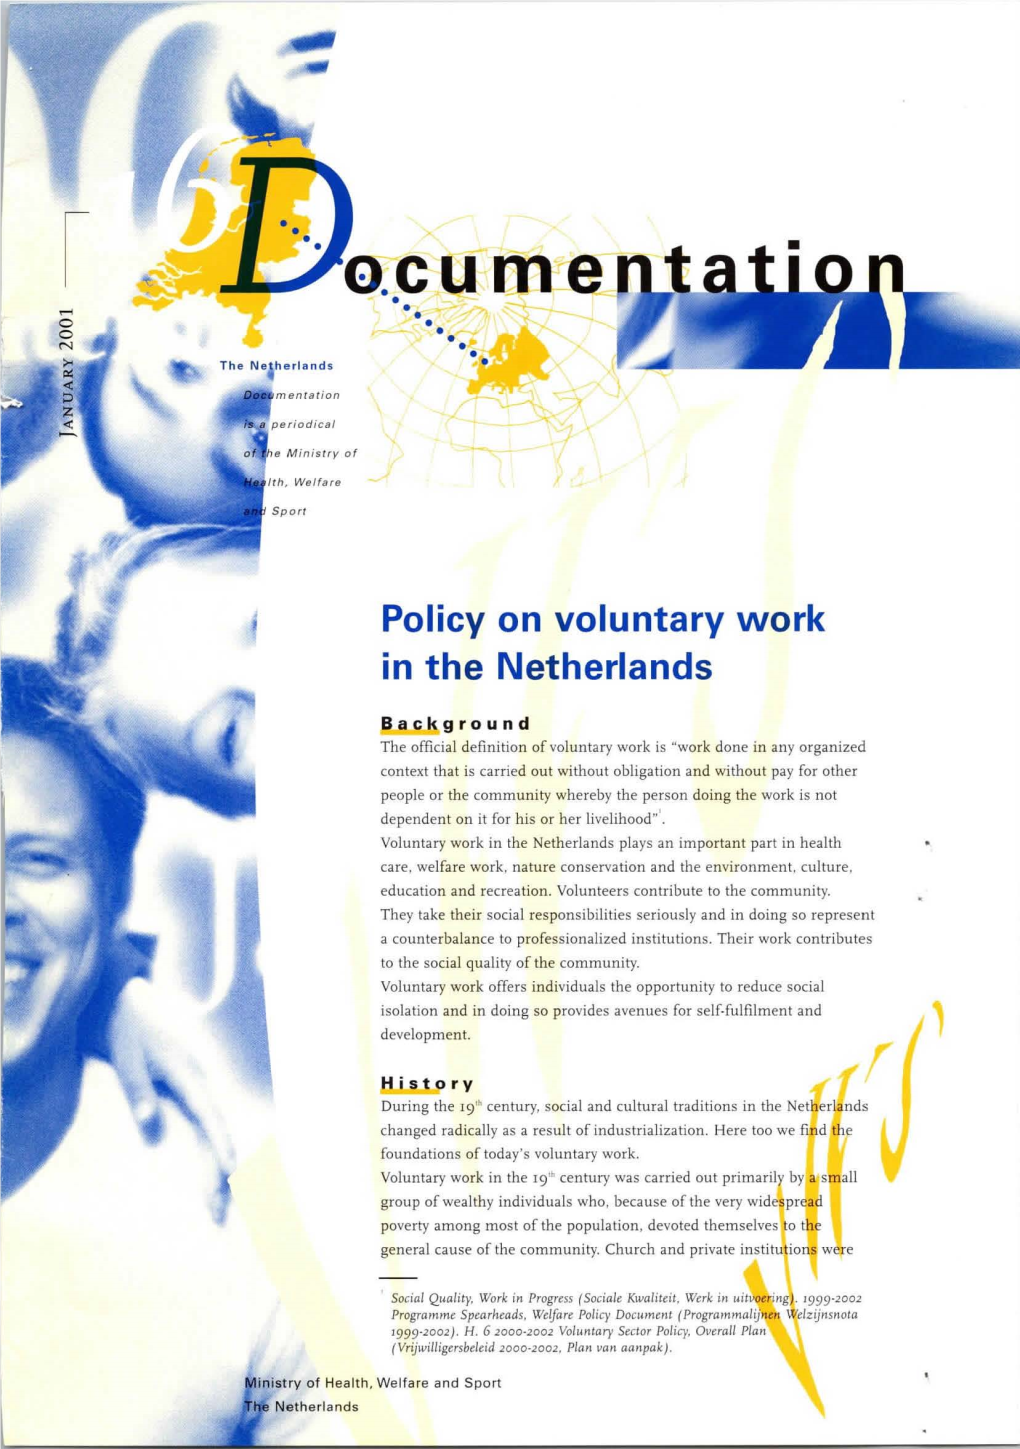 Policy on Voluntary Work in the Netherlands